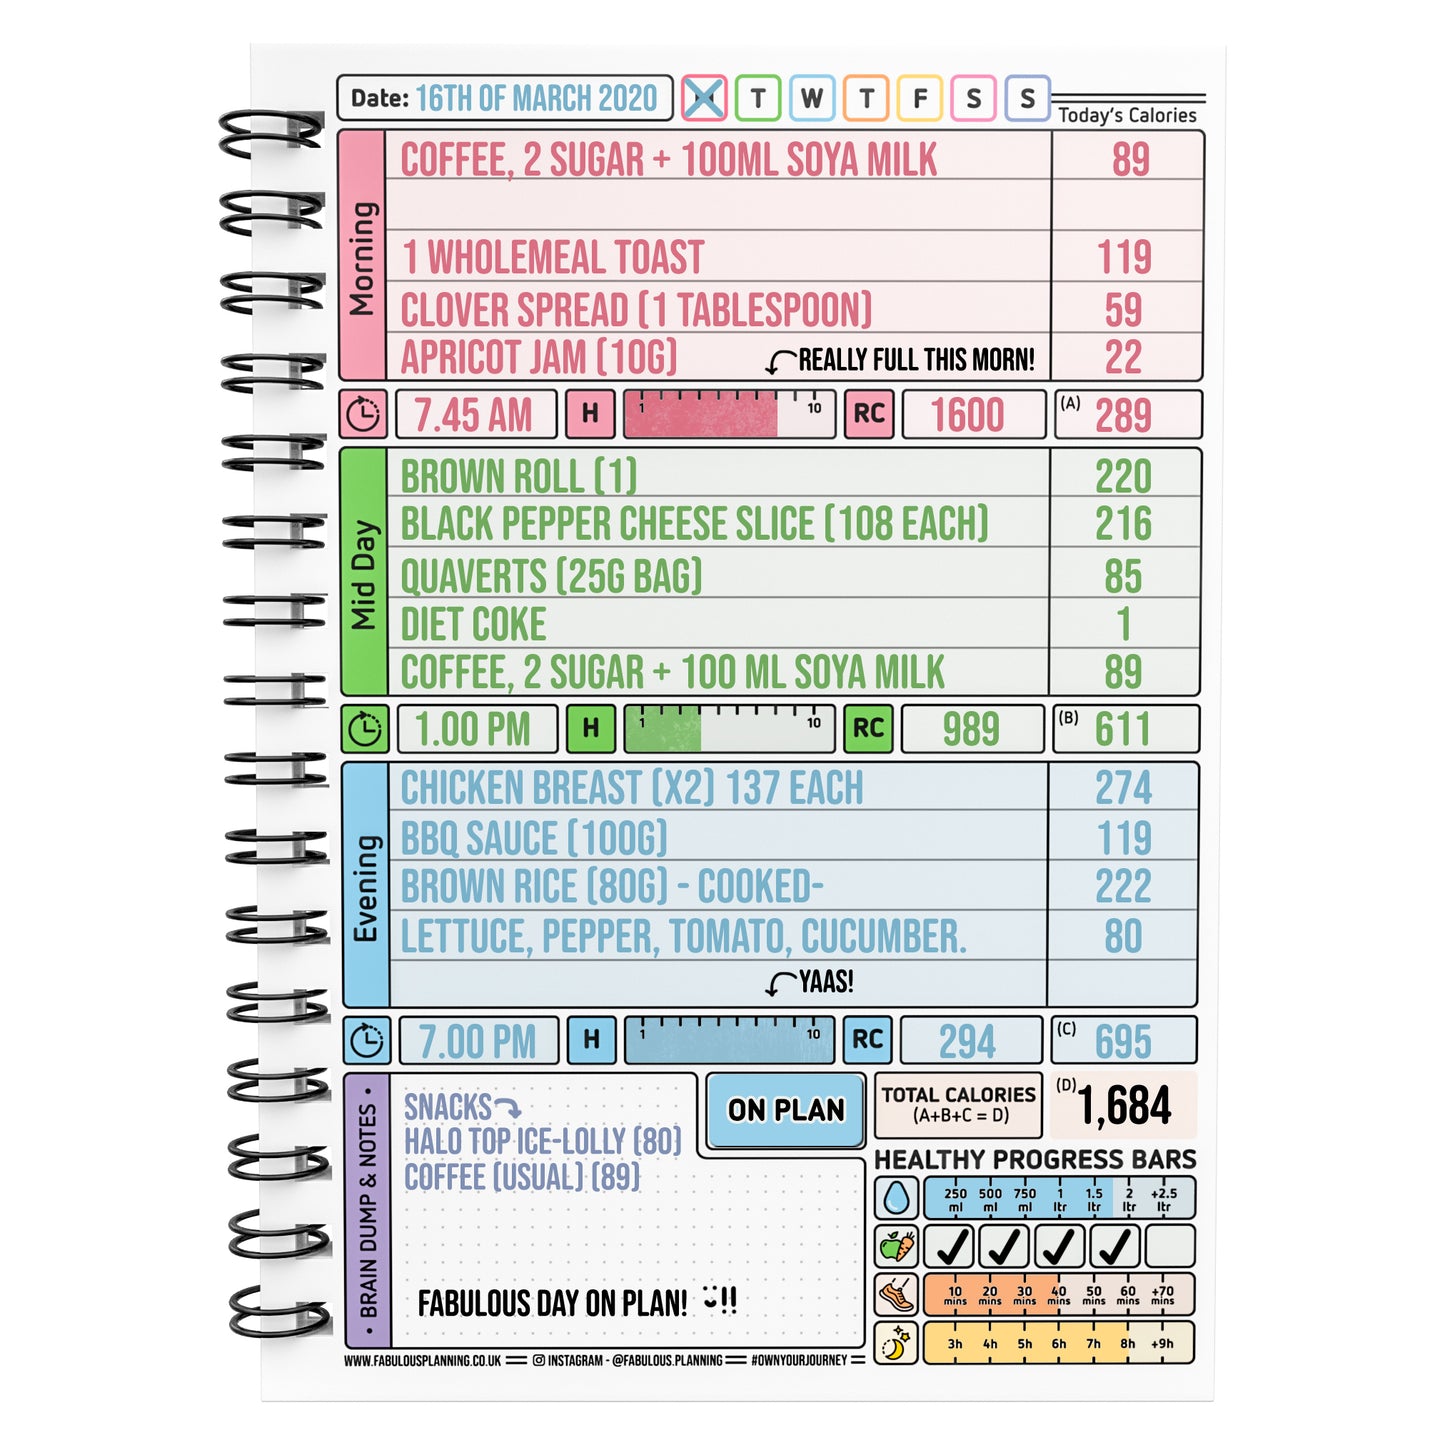 Food Diary - C47 - Calorie Counting